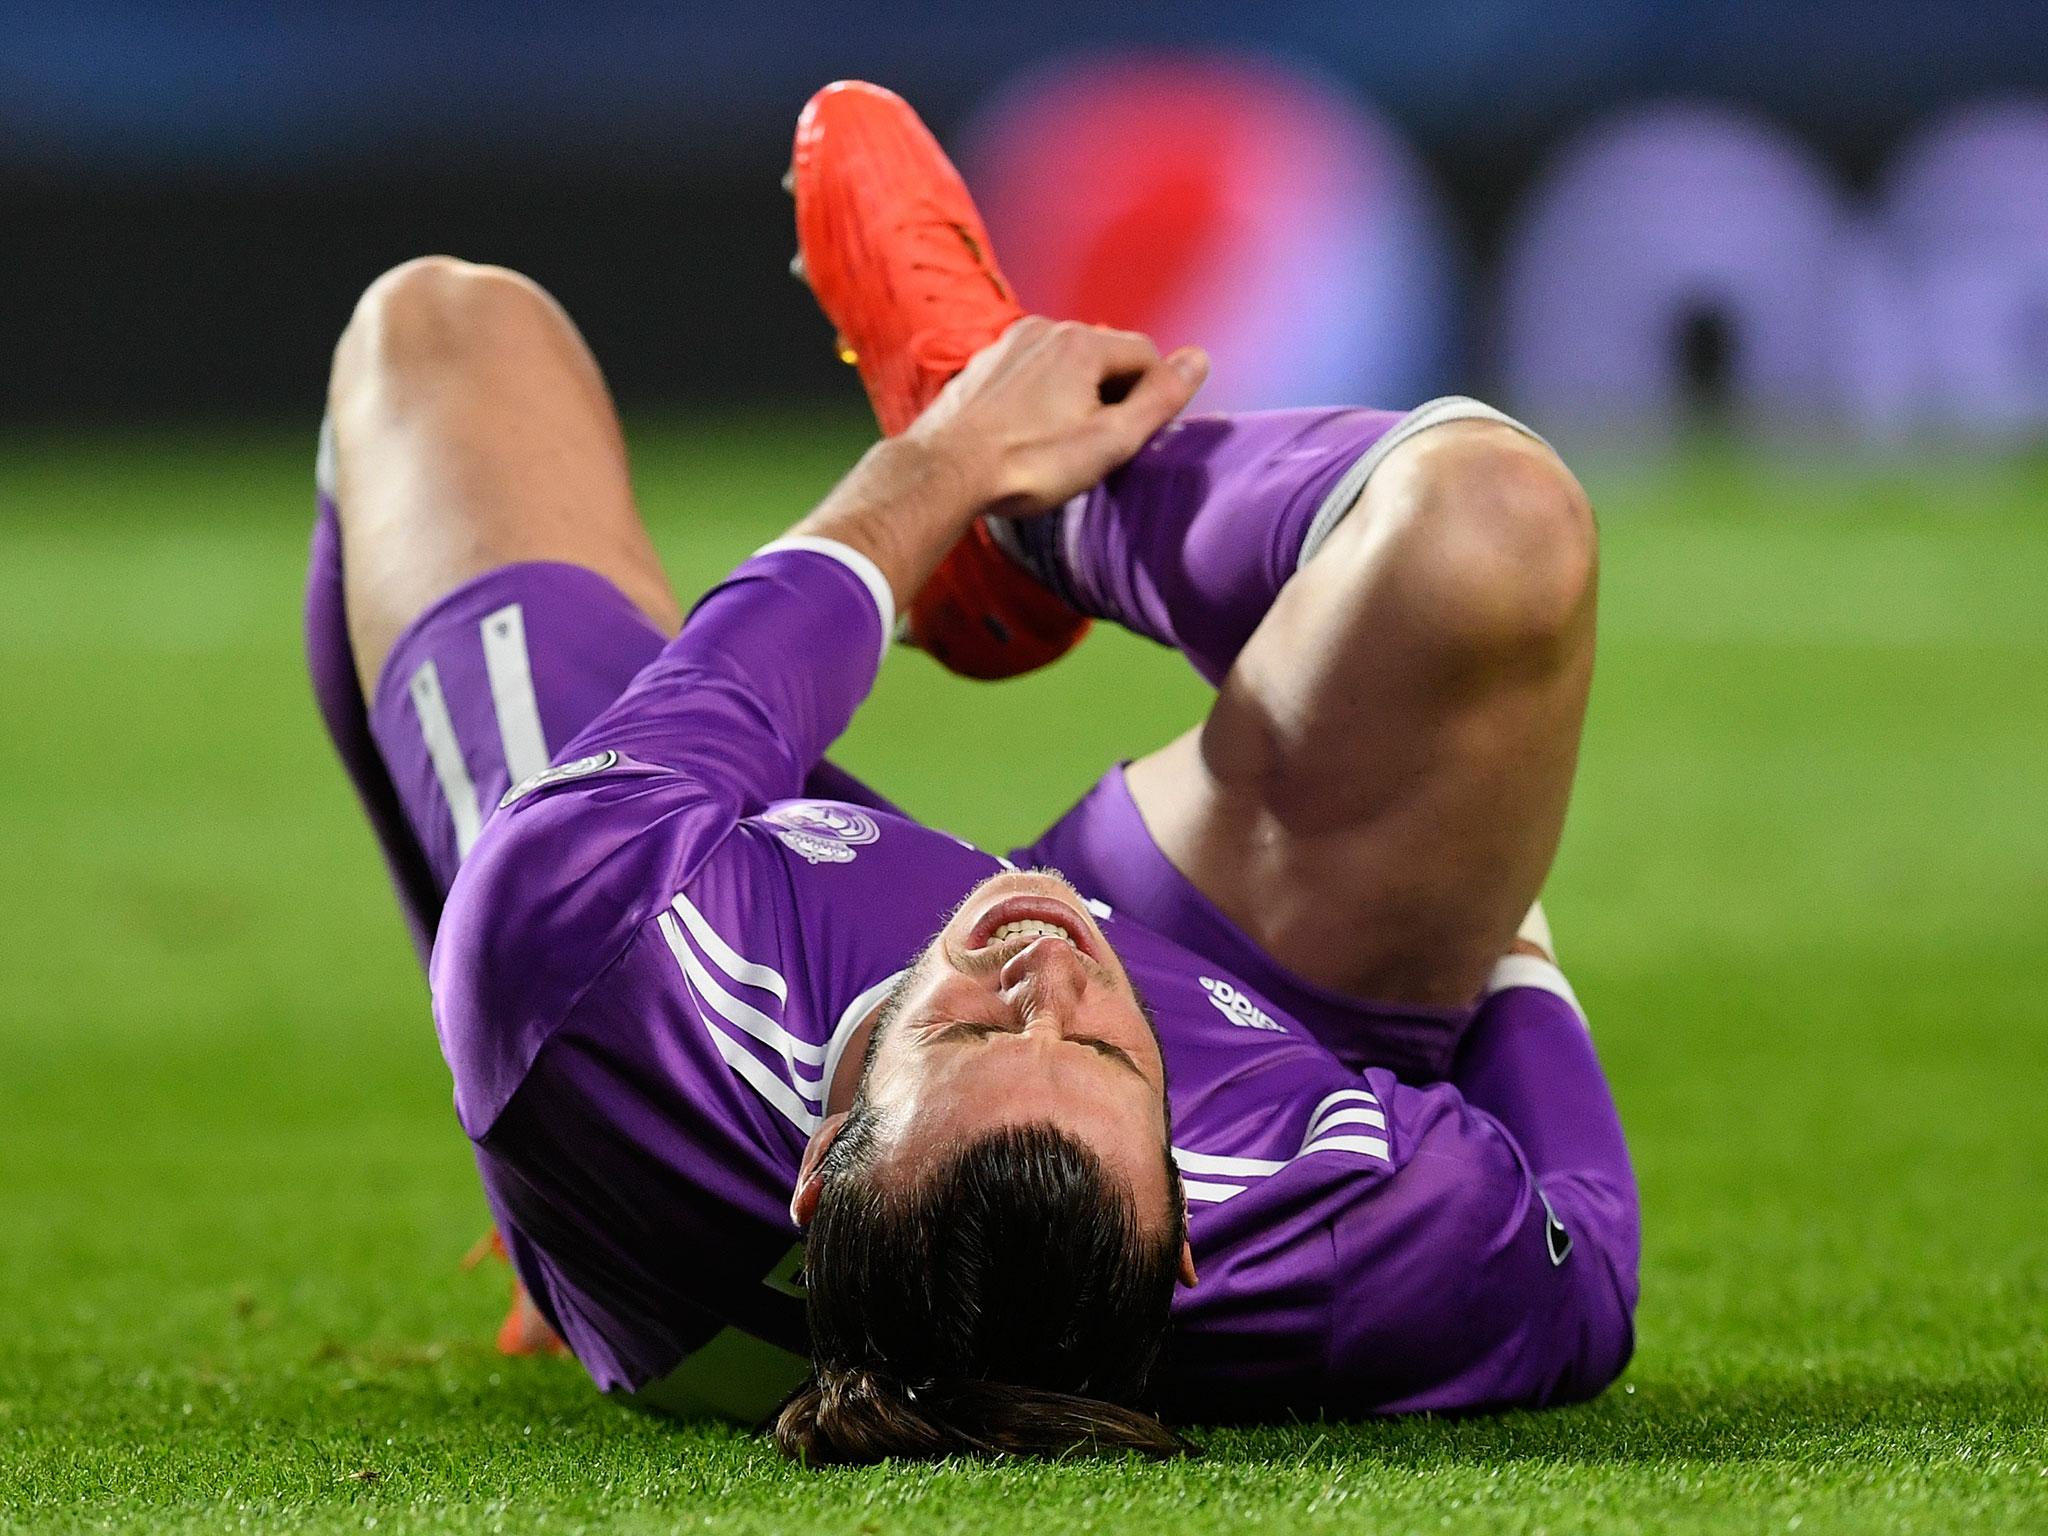 Gareth Bale has been ruled out for four months with a serious ankle injury